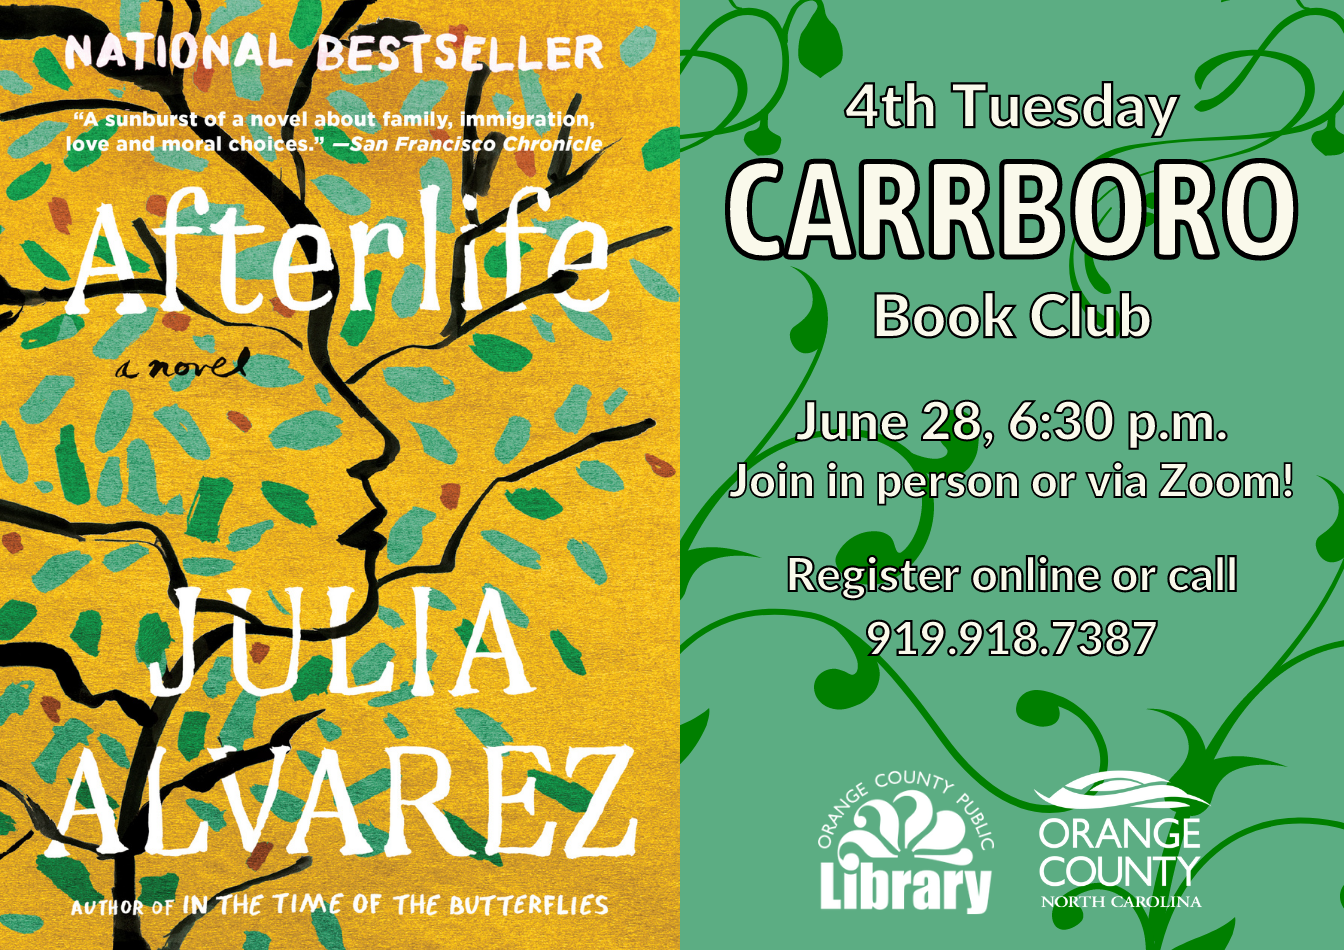 A green flyer with the cover of this month's book club book, Afterlife by Julia Alvarez. The cover features a tree whose branches are shaped like a human face in profile. Flyer text: Fourth Tuesday Carrboro Book Club. June 28, 6:30 pm. Join in person or via Zoom! Register online or call 919-918-7387.